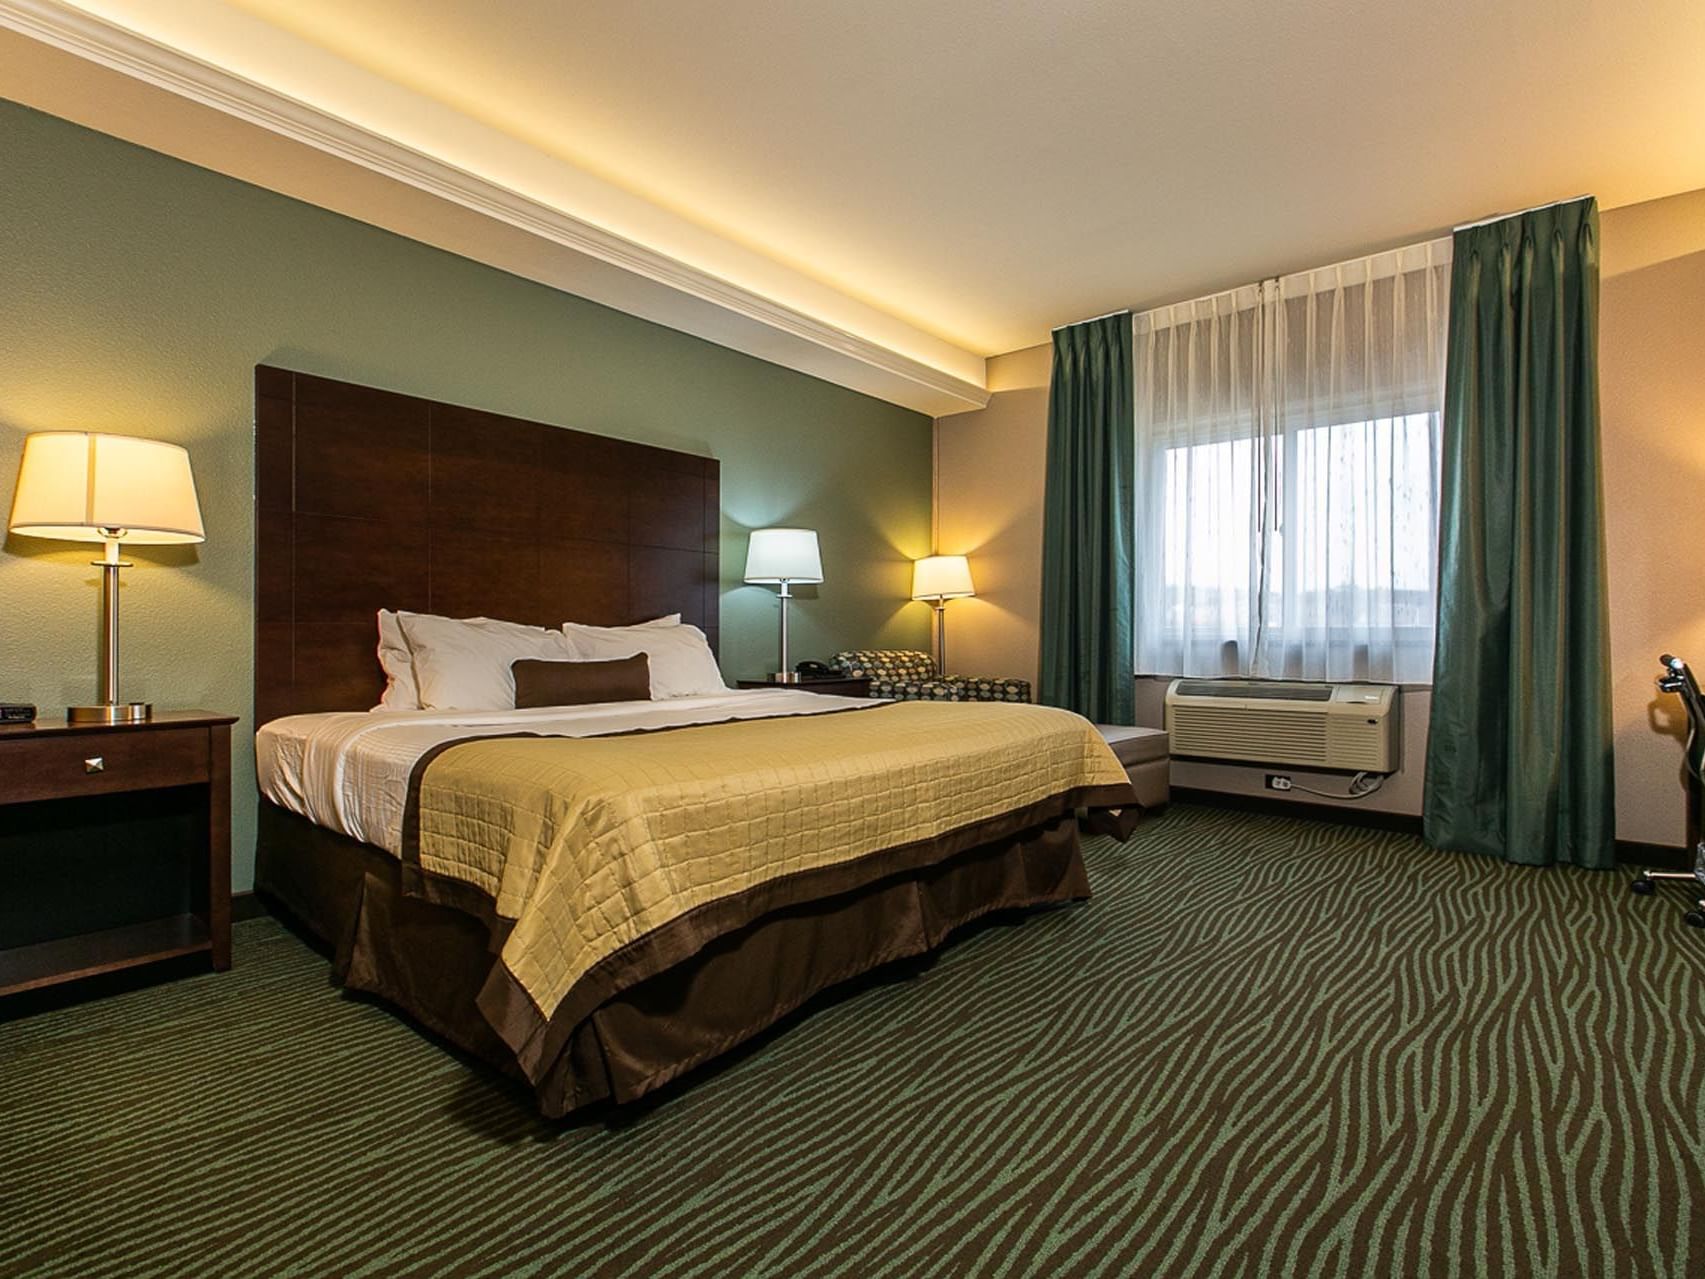 Cozy bed with lamps and carpeted floor in King Resort View at Off Shore Resort